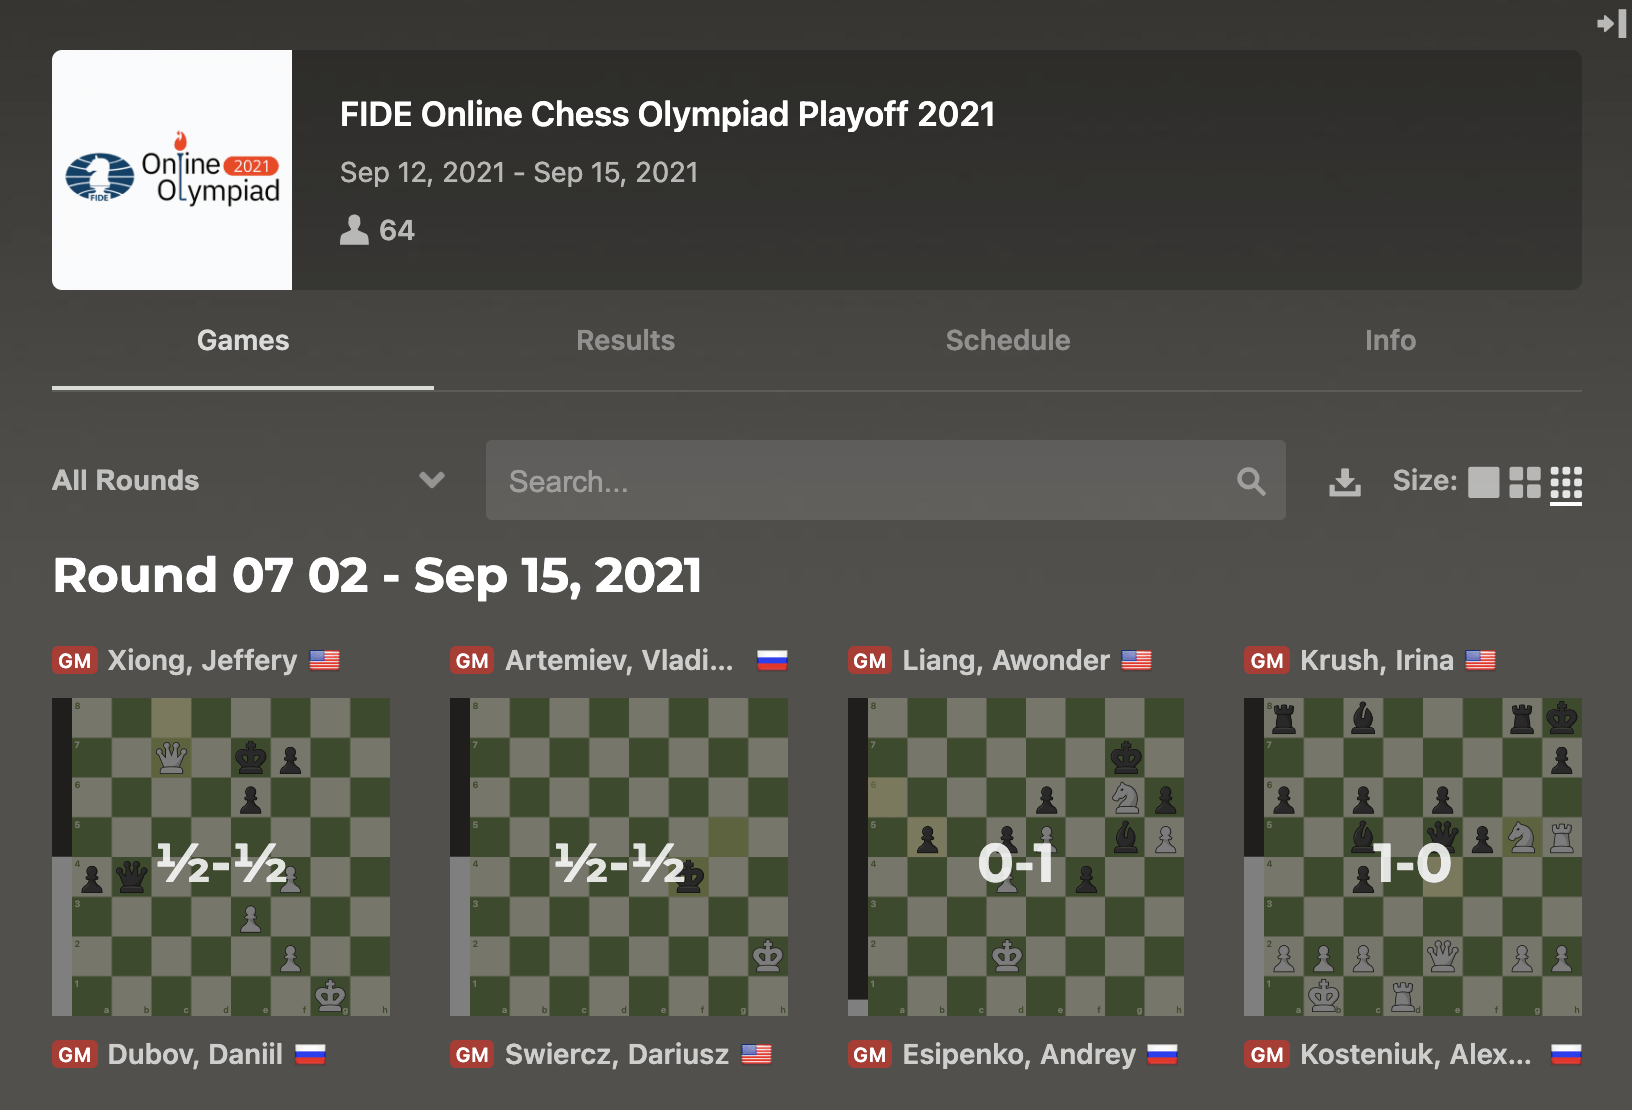 Fantastic Results from the Chess Olympiad Team! Especially Conor